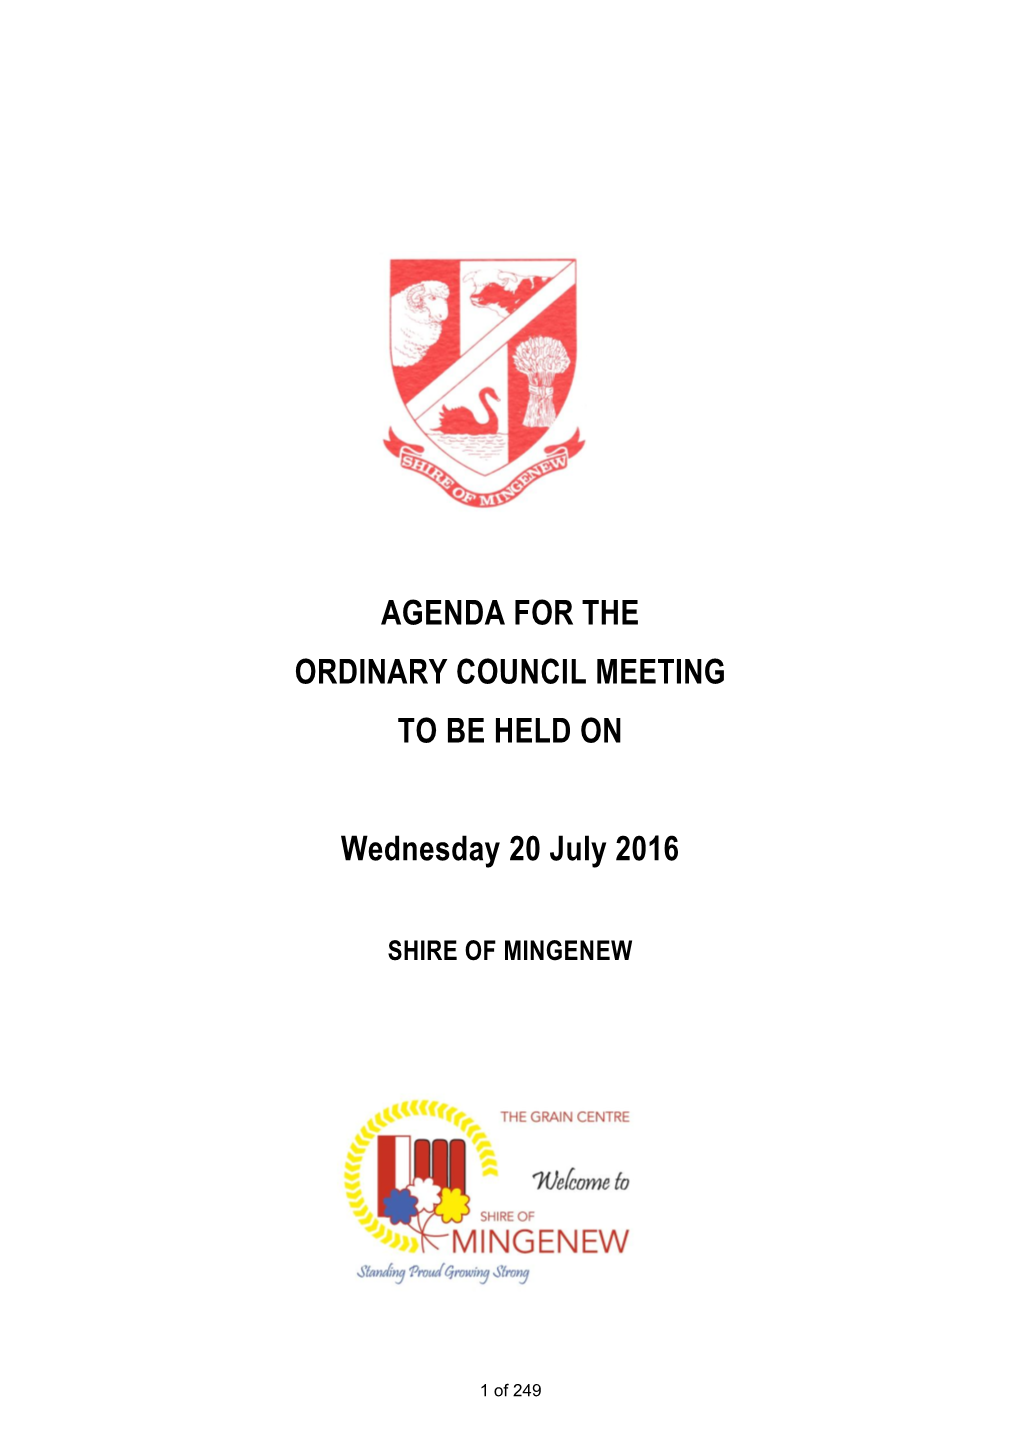 AGENDA for the ORDINARY COUNCIL MEETING to BE HELD on Wednesday 20 July 2016